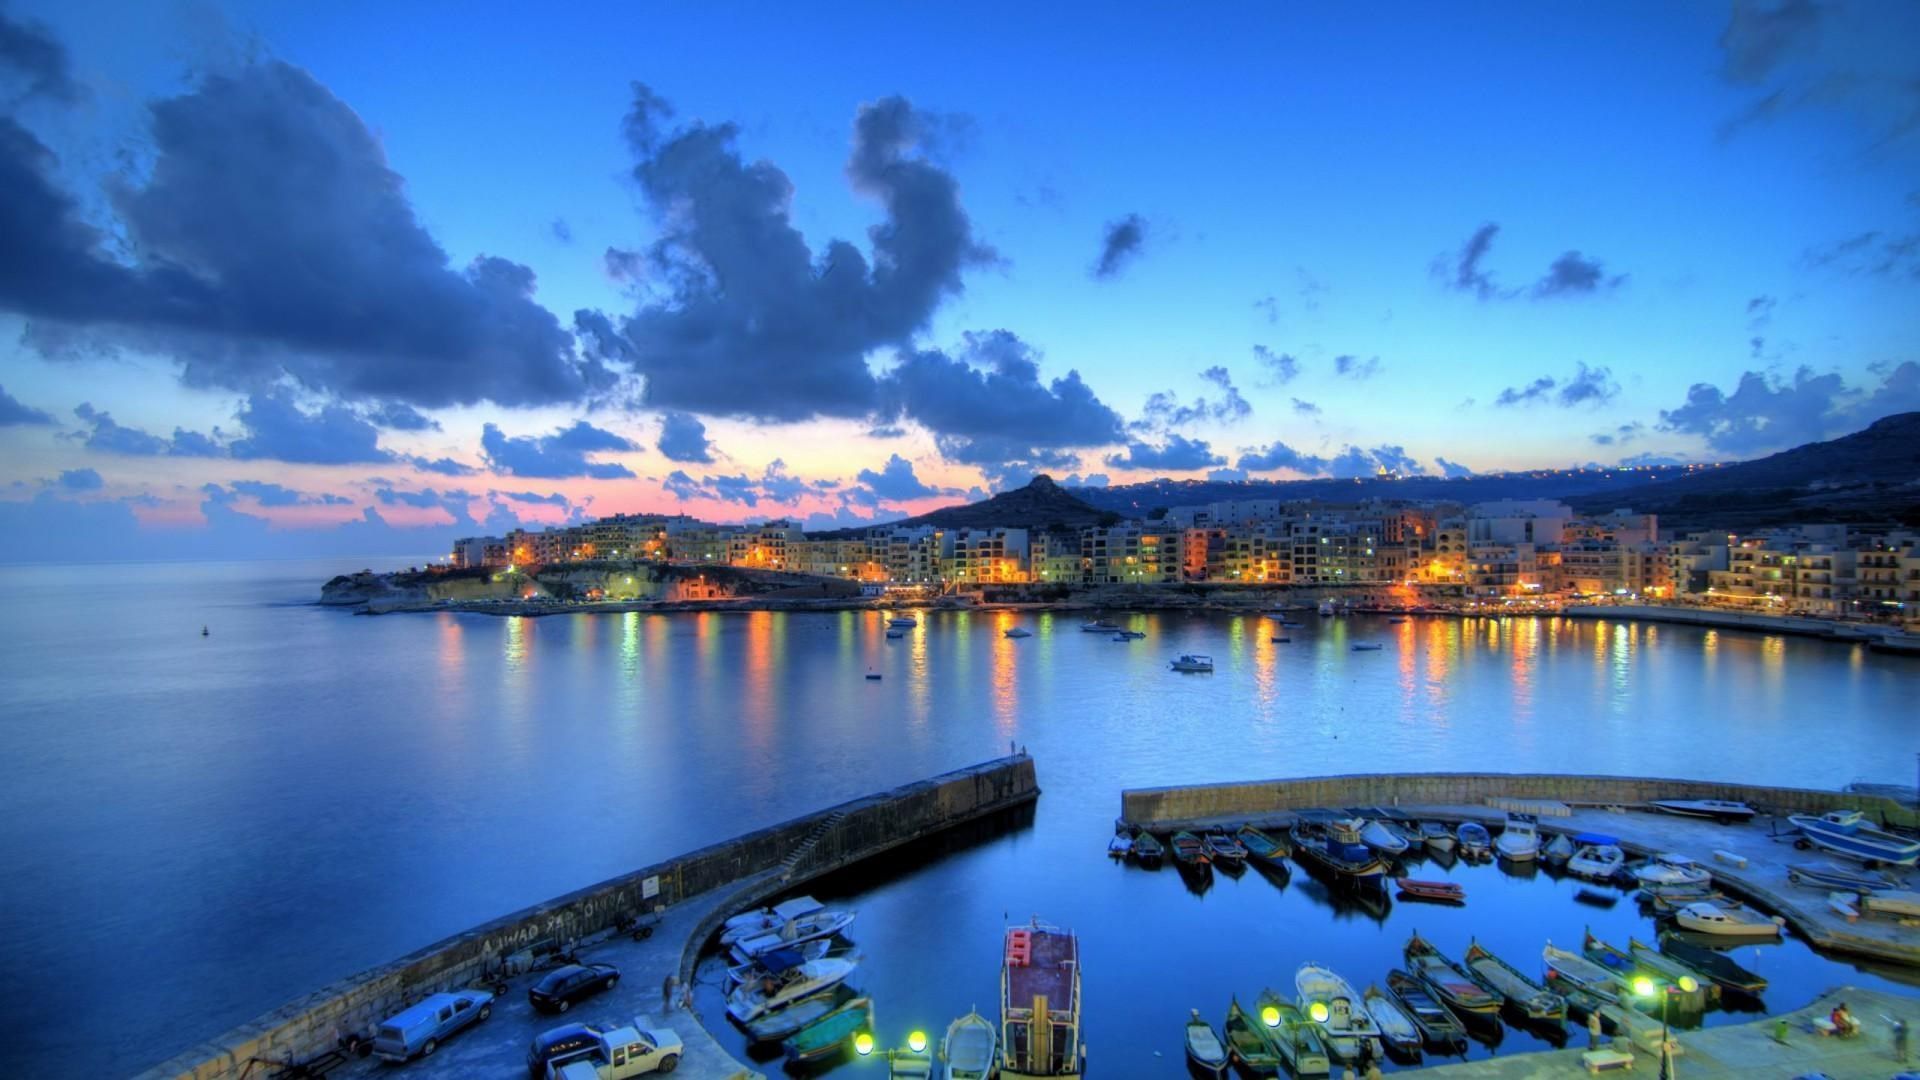 Malta Photos, Download The BEST Free Malta Stock Photos & HD Images